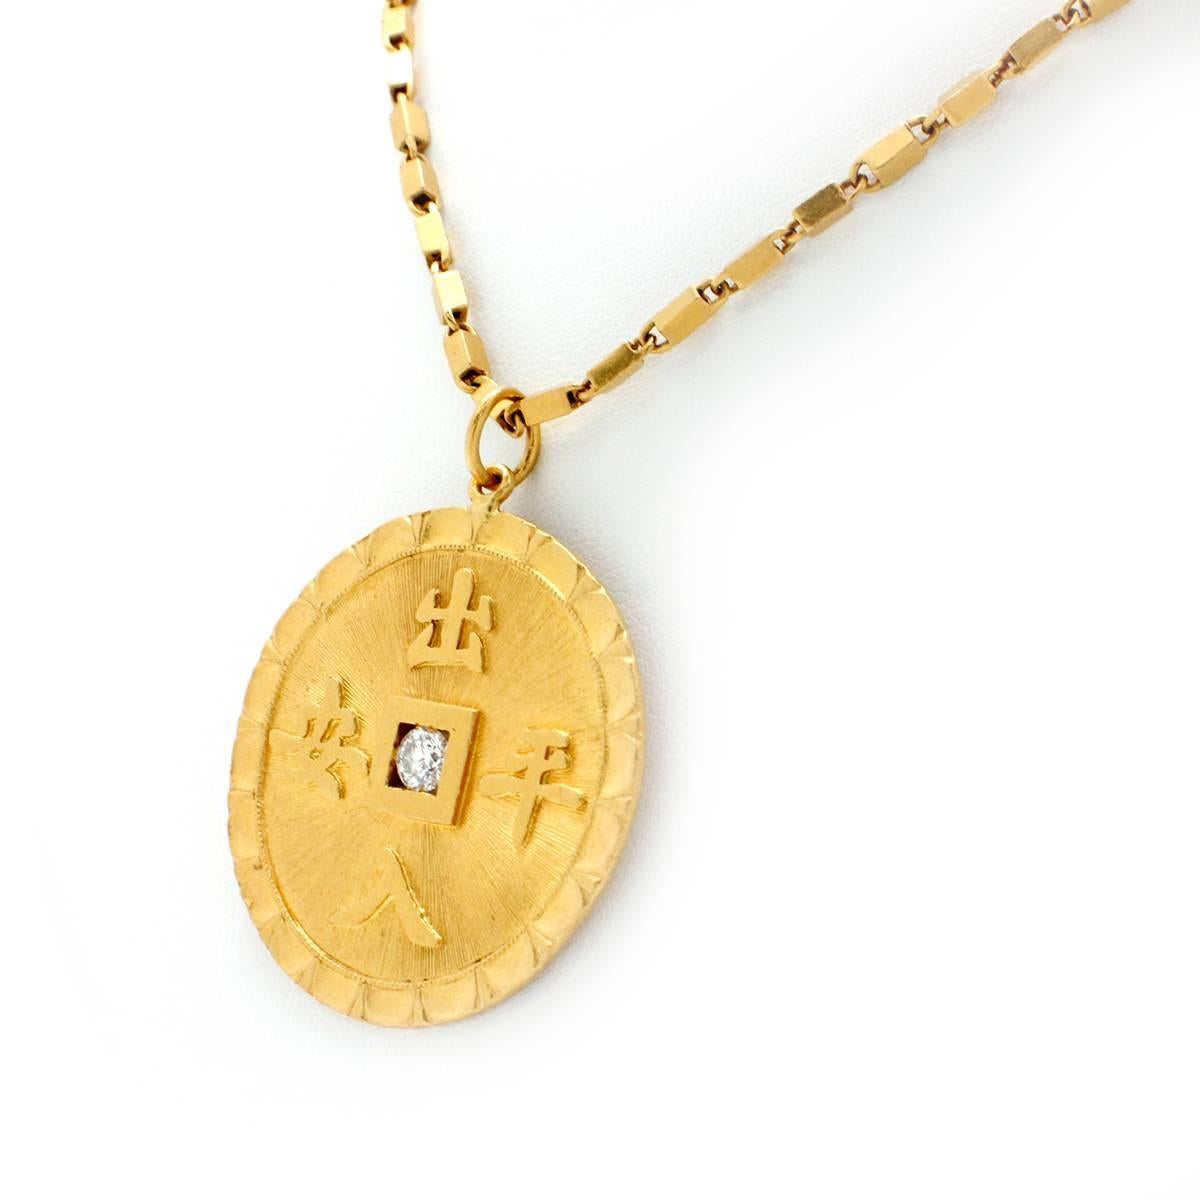 Solid 24k Yellow Gold Asian Coin Necklace!

This powerful necklace is made completely in solid 24k yellow gold. The pendant measures 38.97mm wide, and The square bar-link chain is 24” inches long. The complete necklace weighs 45.7 grams. The